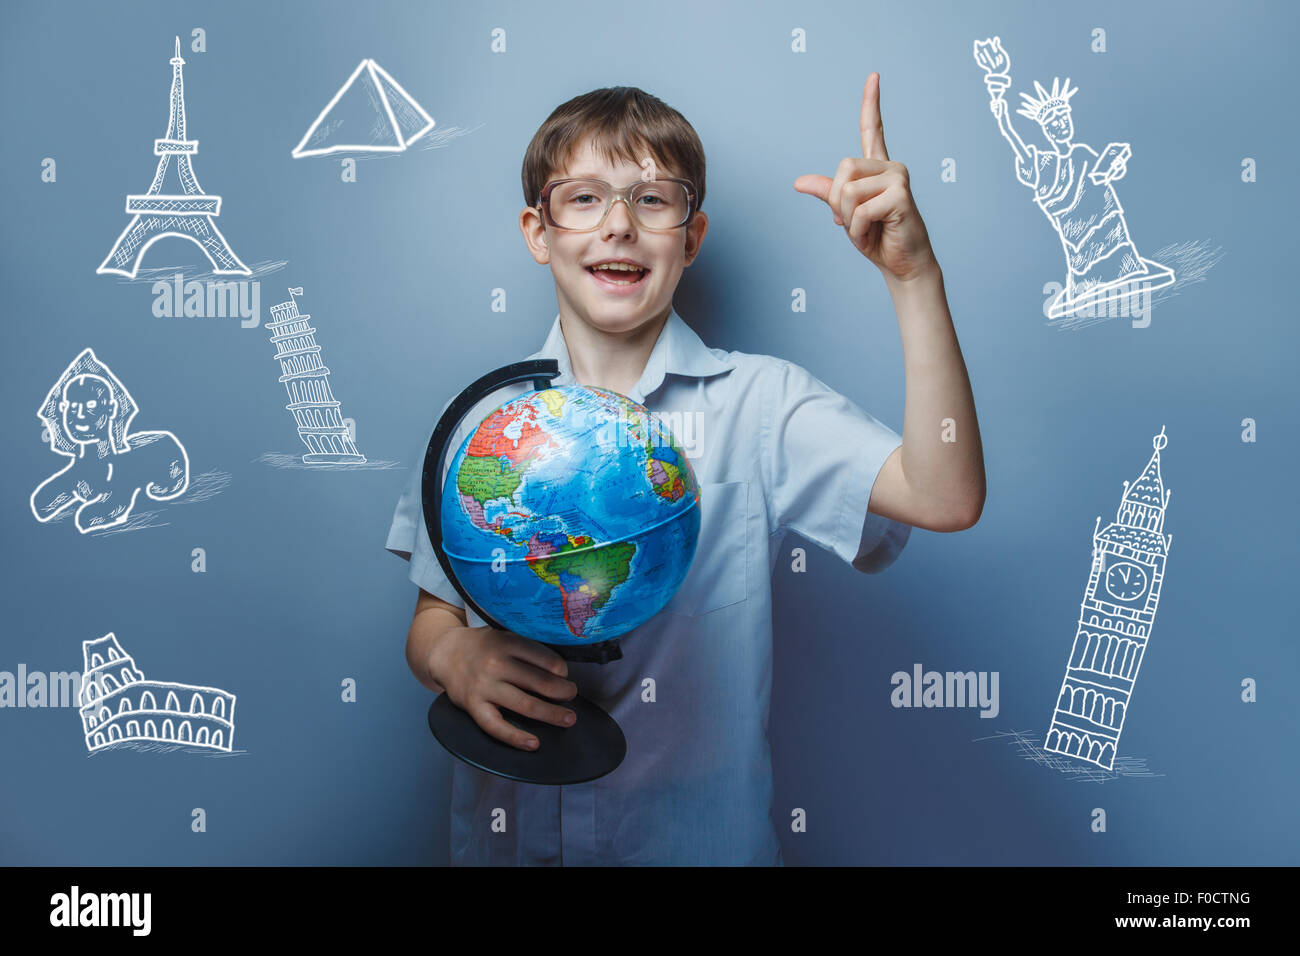 a boy of 10 years of European appearance with glasses holding a globe in hands  on a gray  background Stock Photo